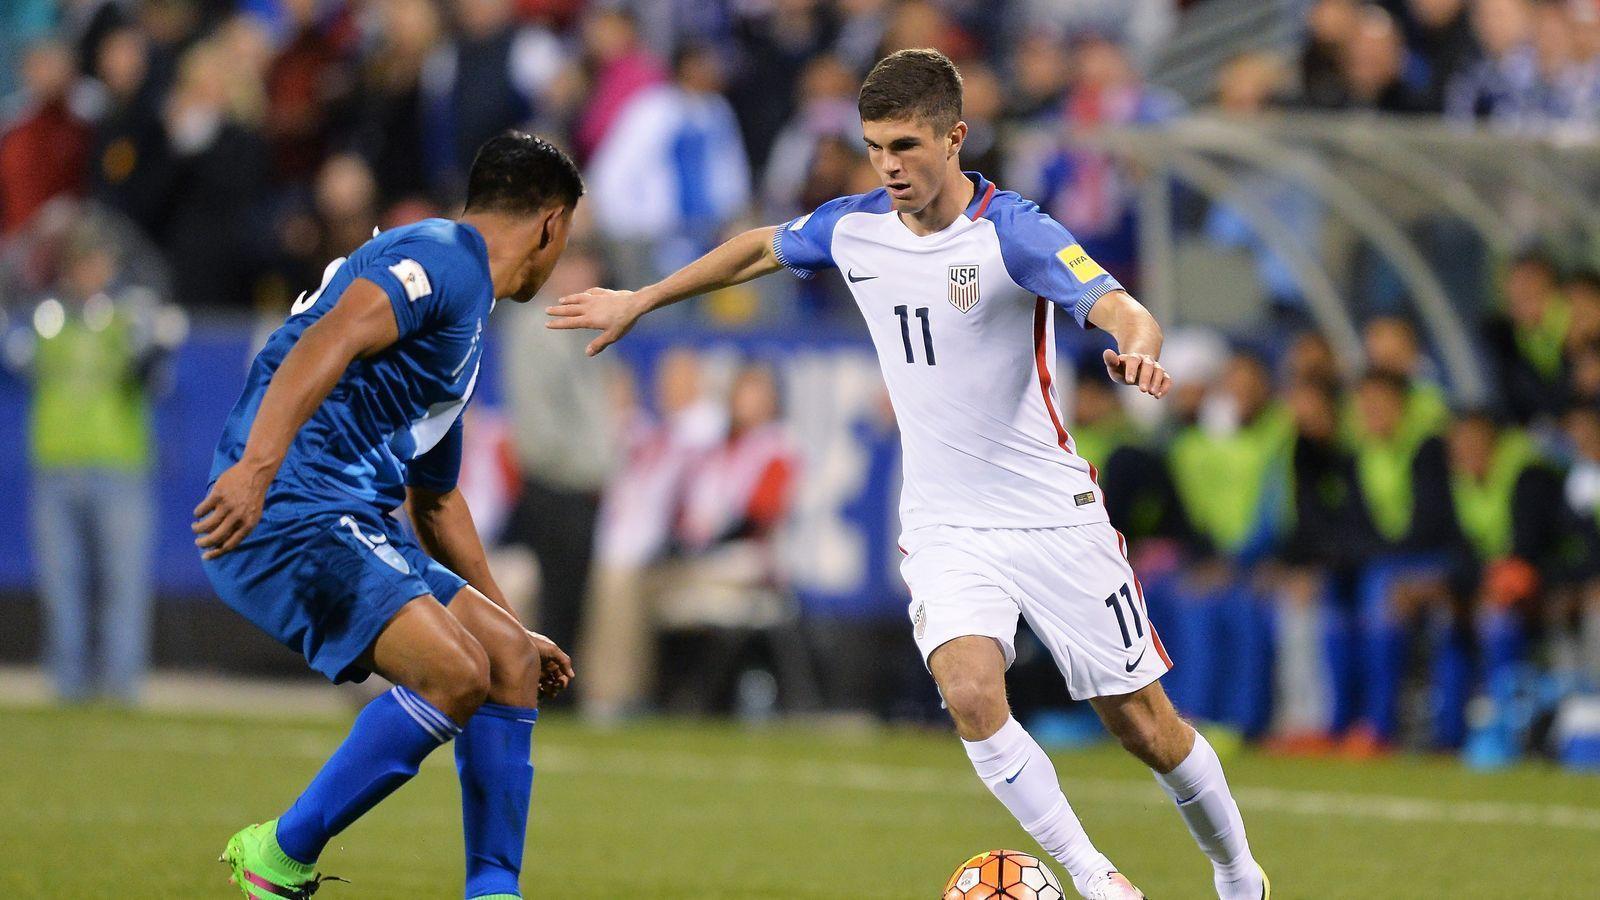 What&;s Next For Christian Pulisic Now That He&;s Cap Tied?